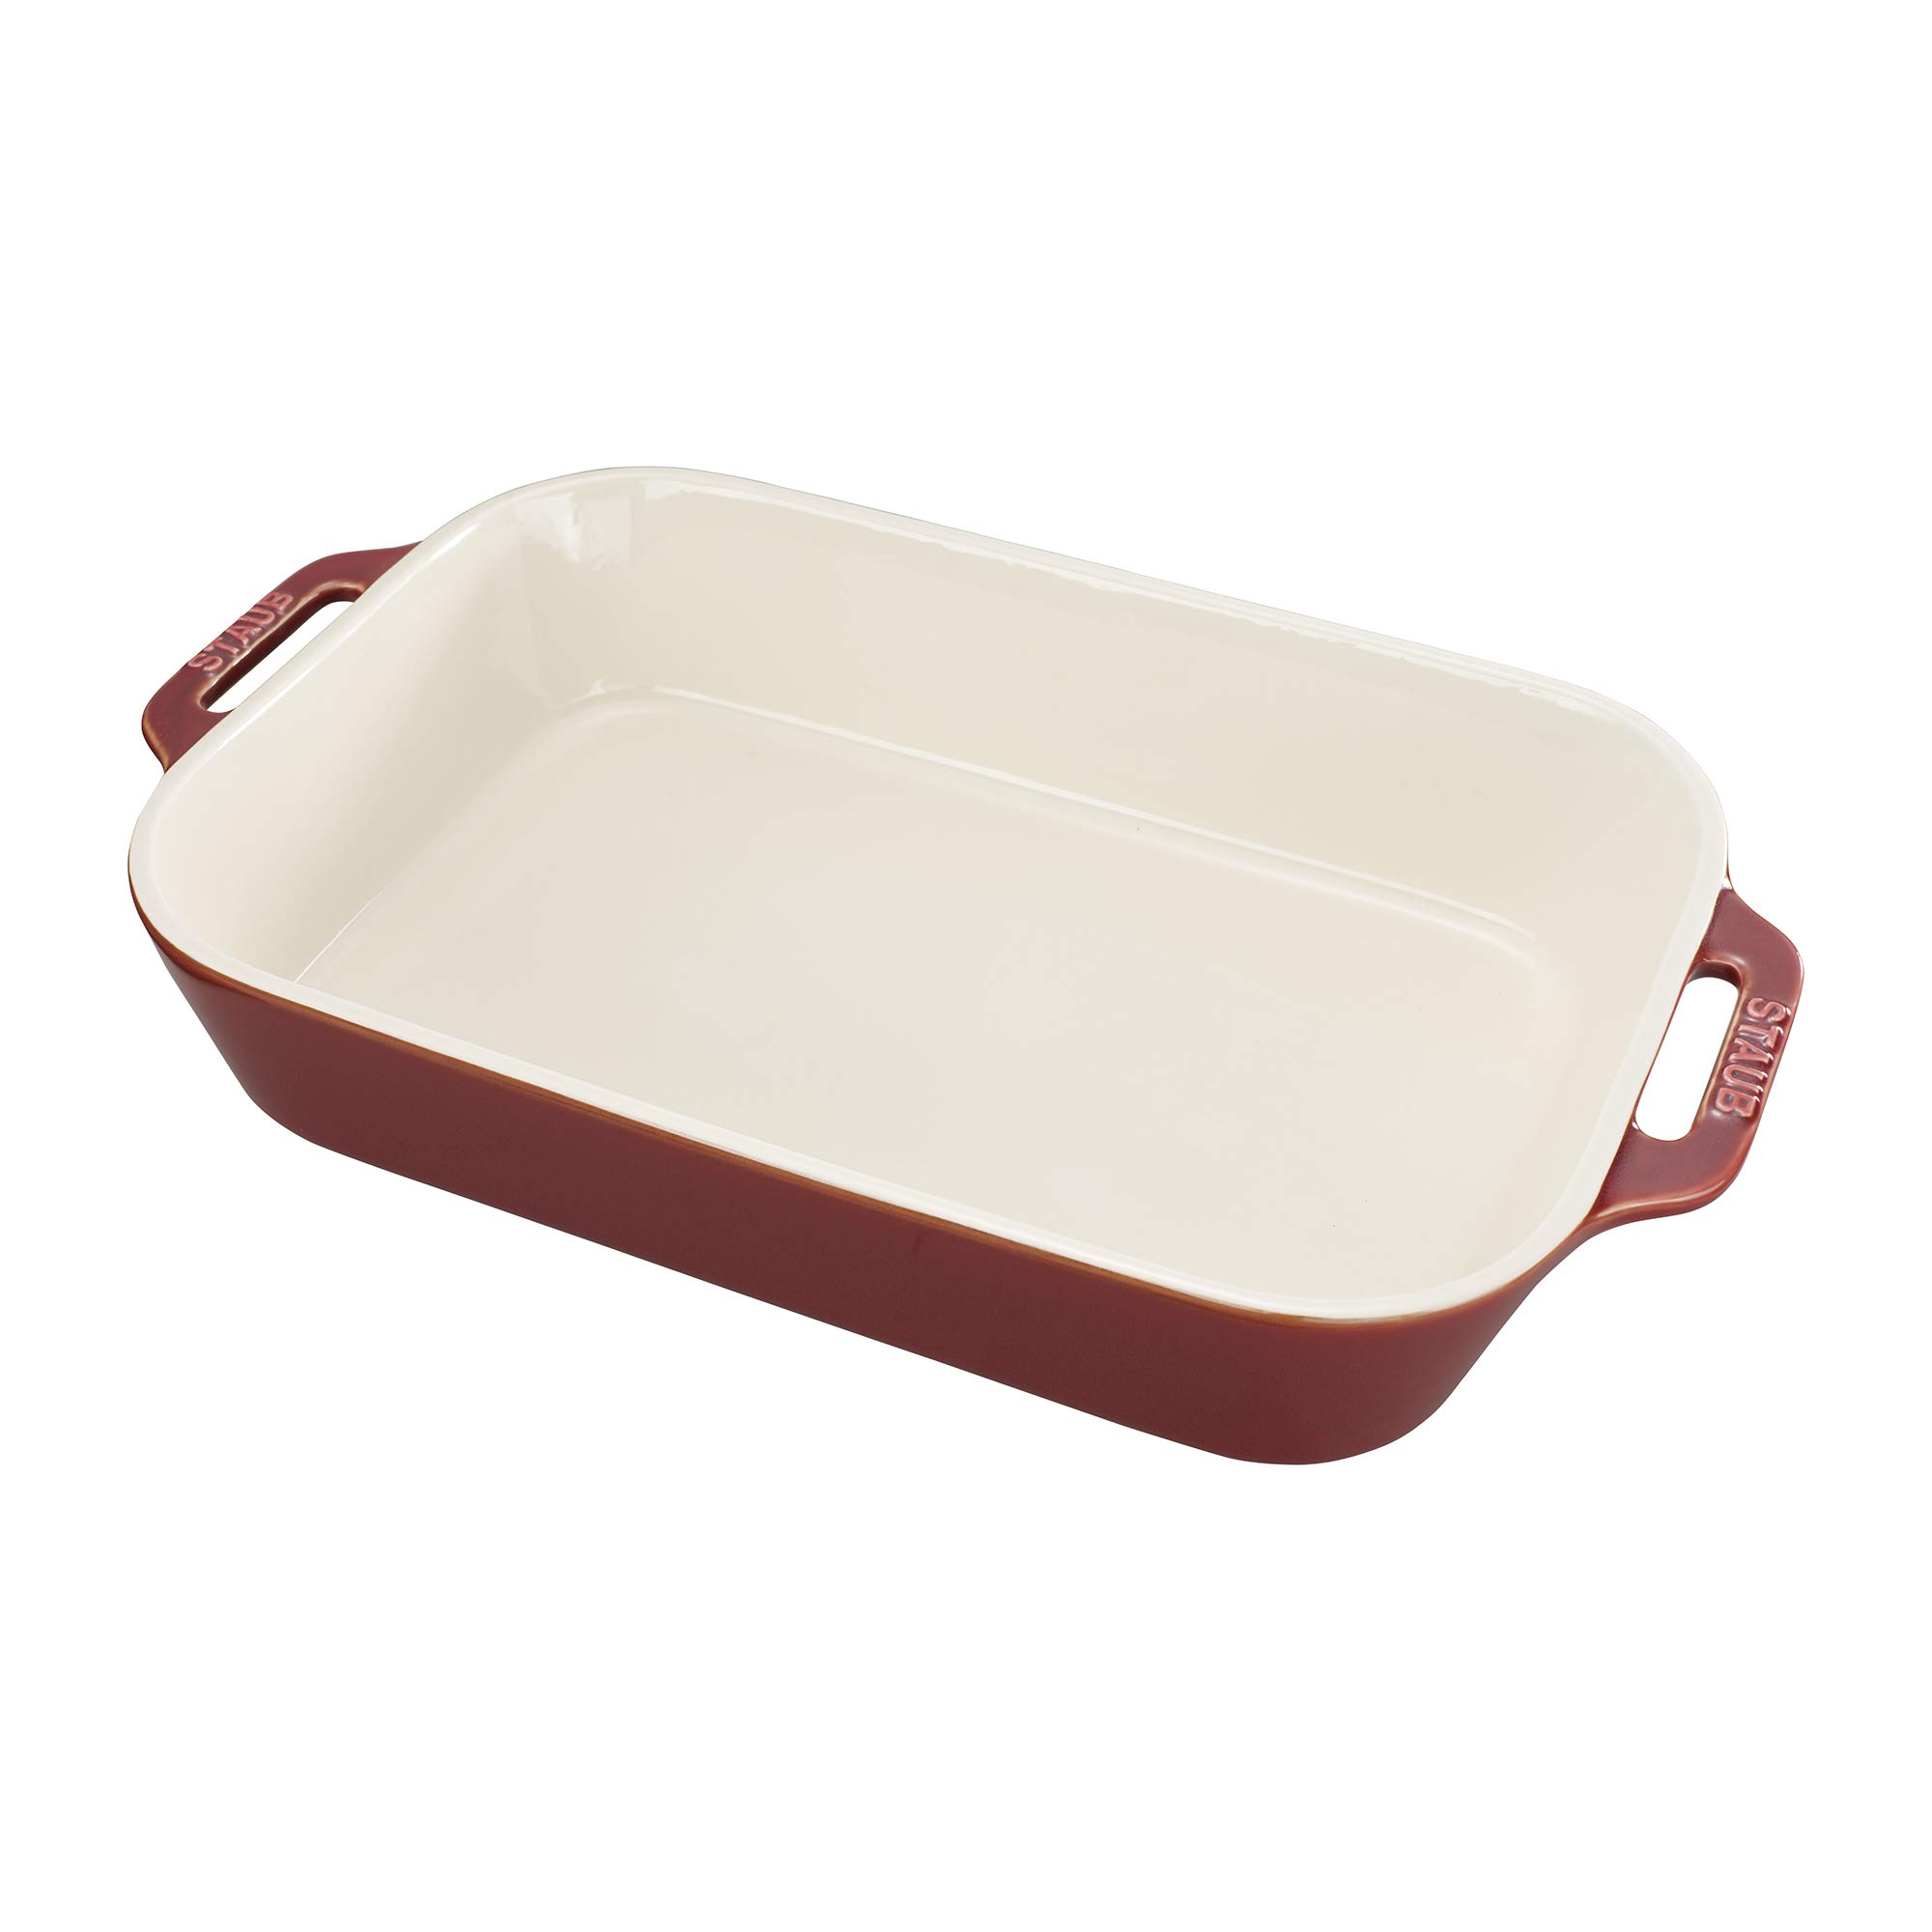 Rustic Red - Staub 40511-889 Baking-Dishes 33cm x 23cm Rustic Red